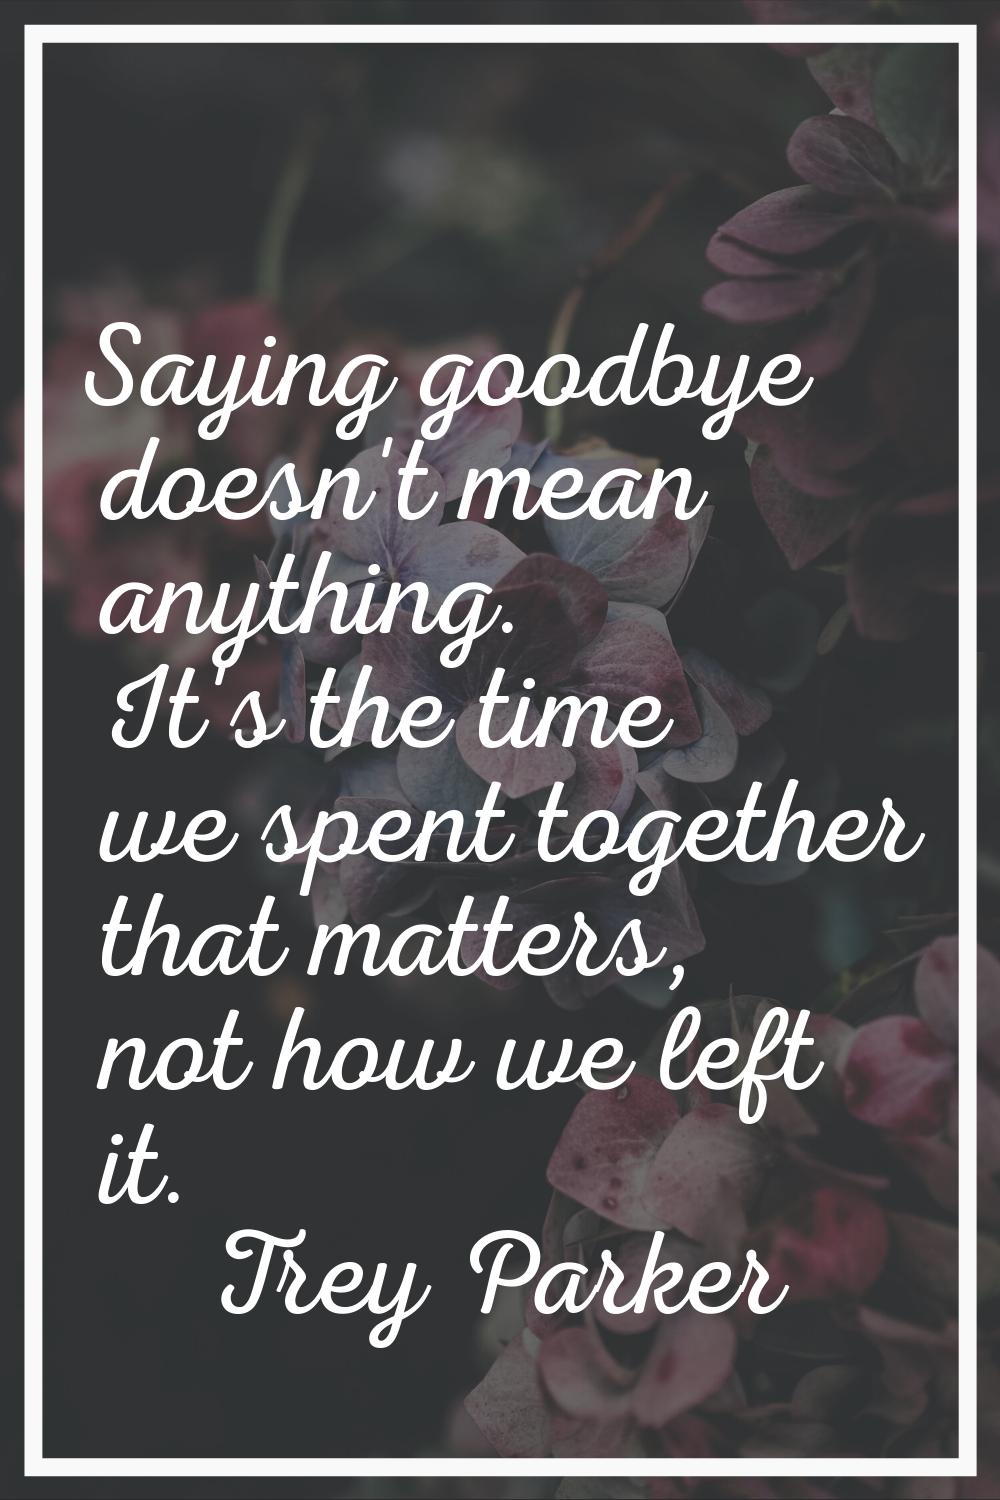 Saying goodbye doesn't mean anything. It's the time we spent together that matters, not how we left